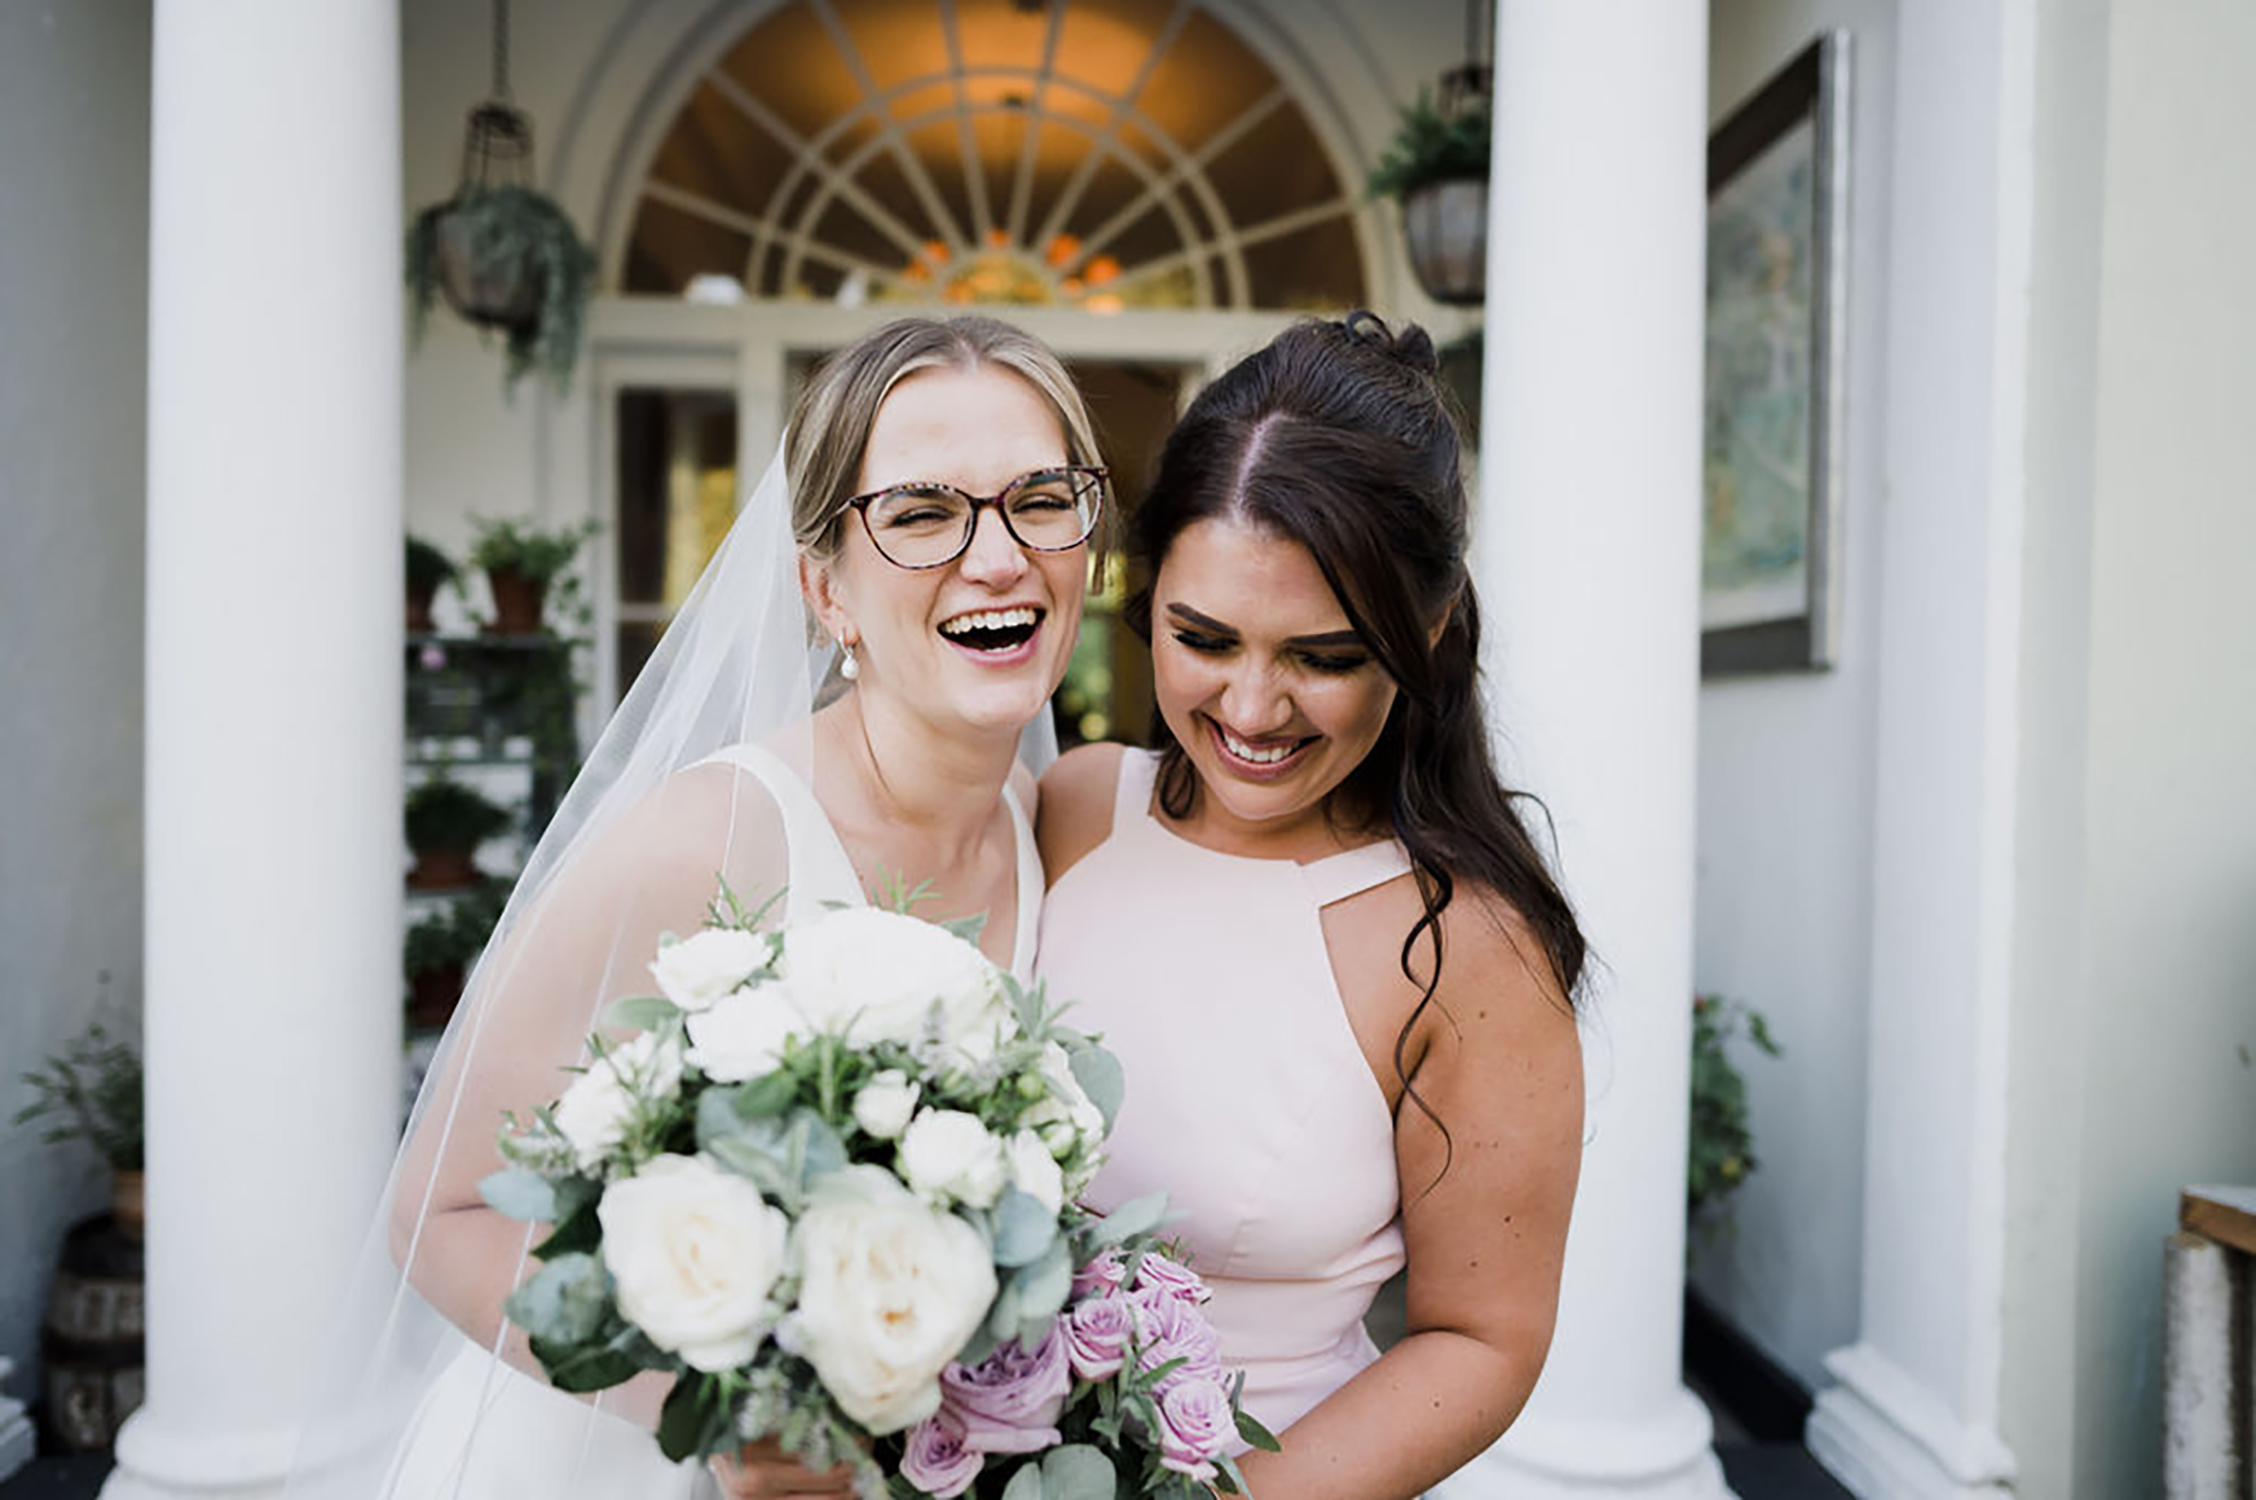 Liberty Pearl Photo & Film Collective Devon Wedding Photography at Deer Park Country House. Bride and bridesmaid holding flowers.